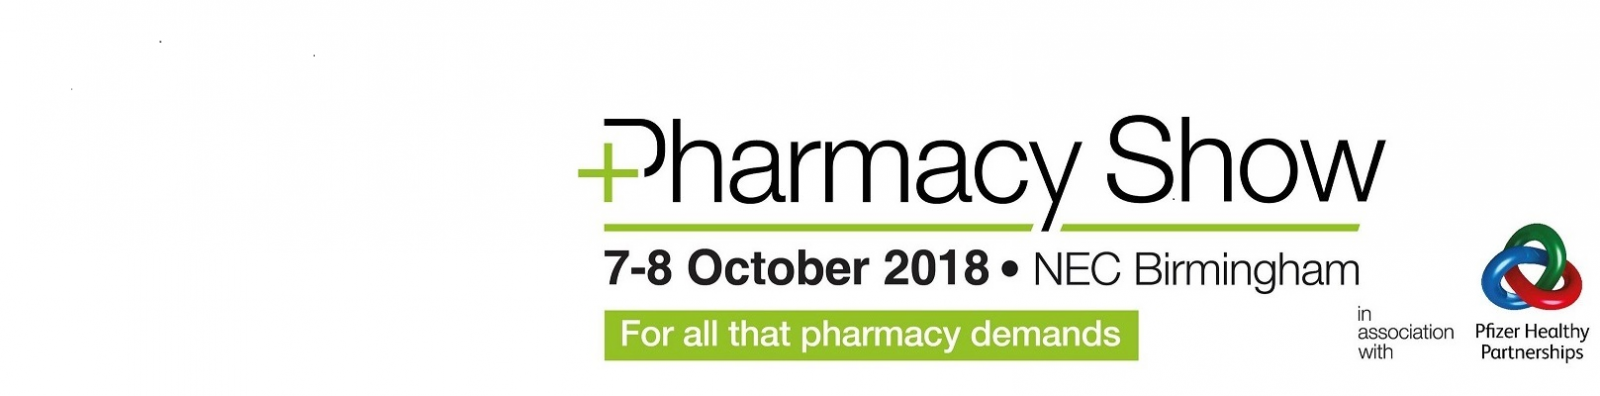 Meet us at the Pharmacy Show 2018